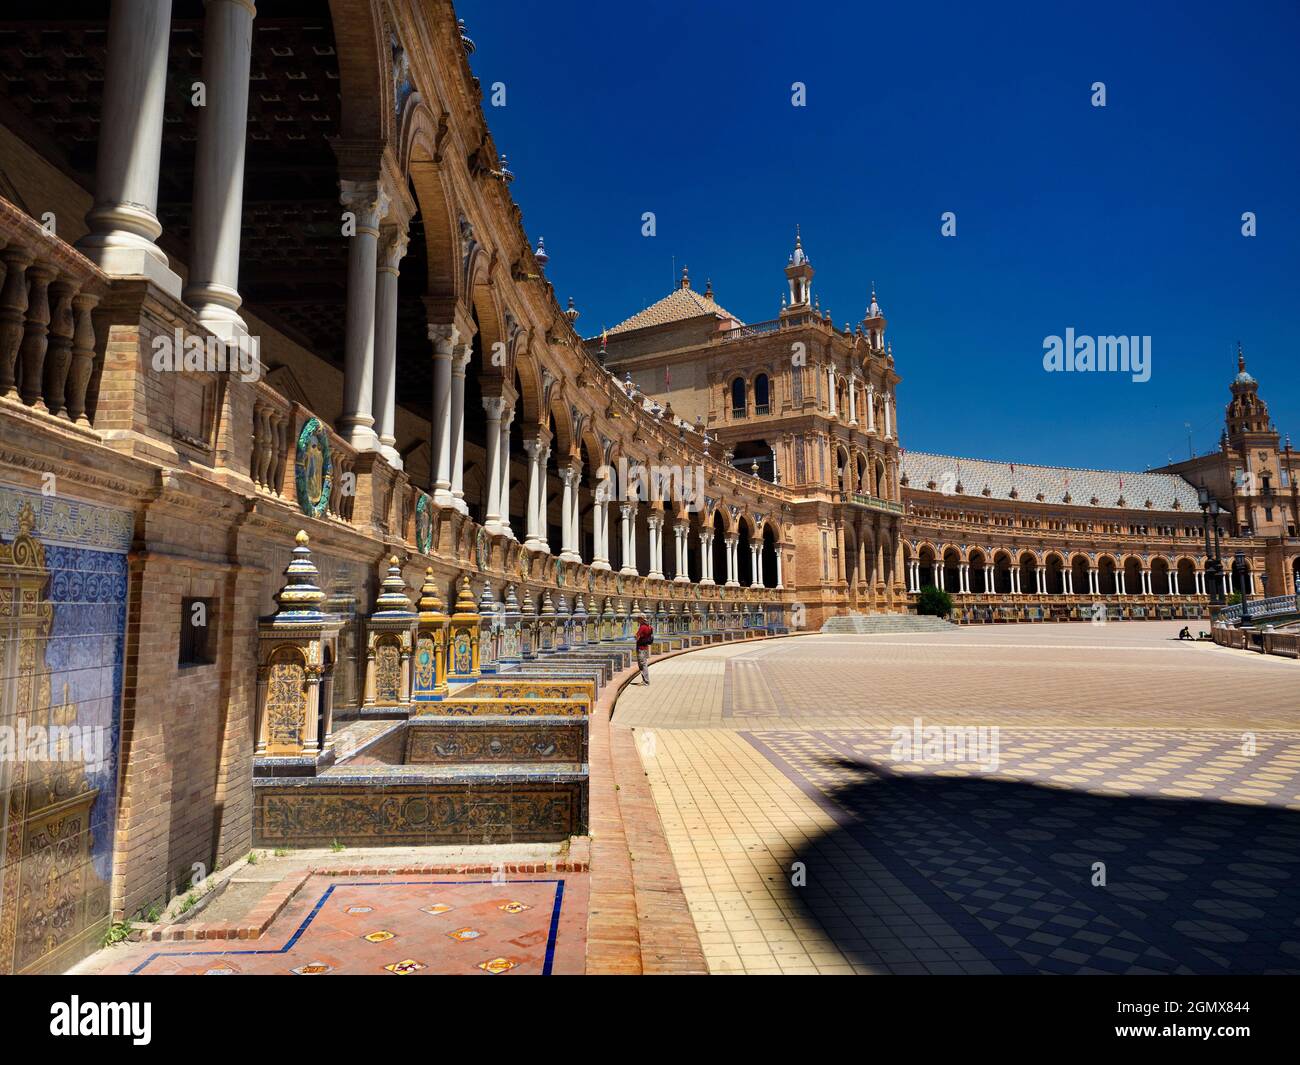 Seville, Andalucia, Spain - 31 May 2016; two people in view. Located in the Parque de Mar’a Luisa in Seville, Spain, the grandiose Plaza de Espa–a was Stock Photo